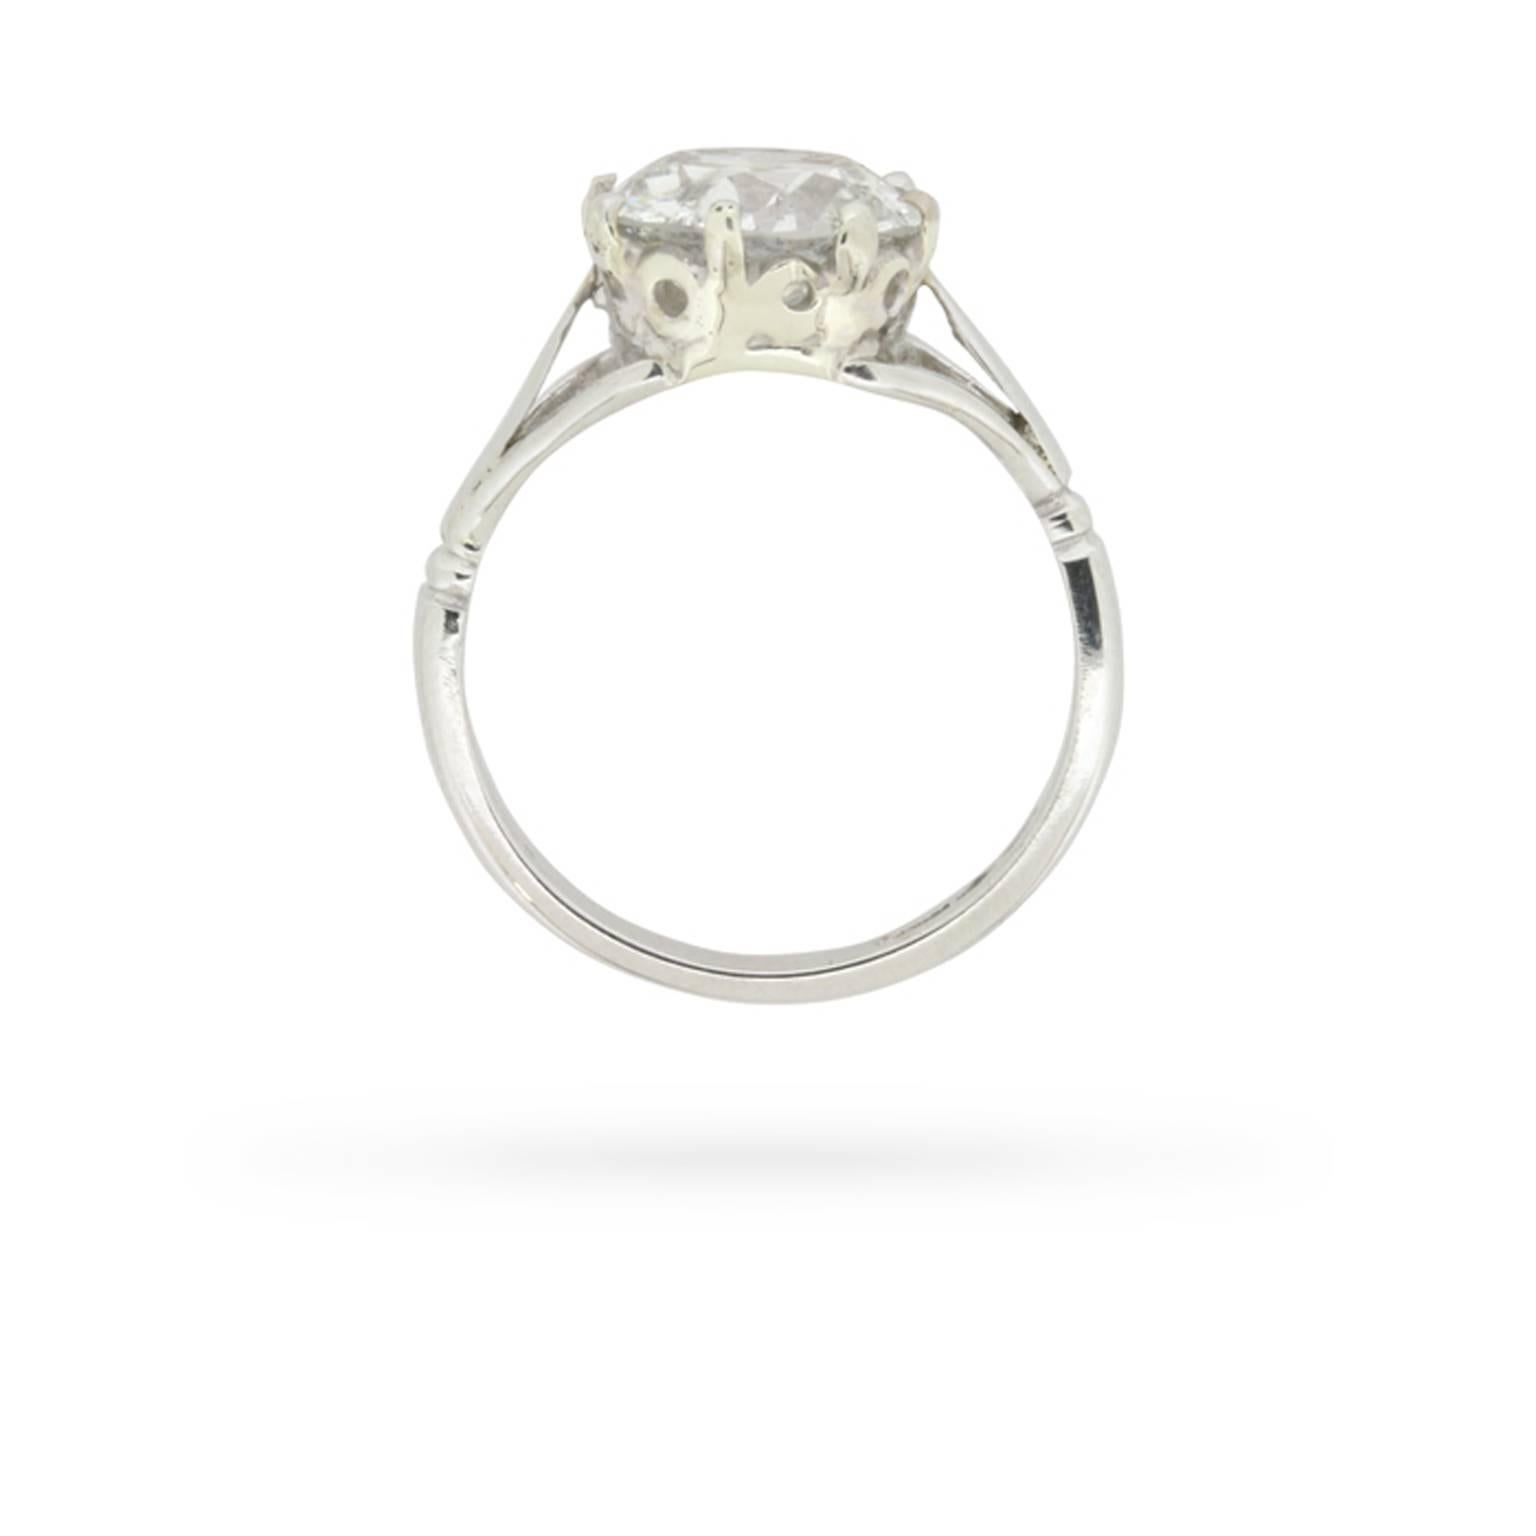 This stately 1920s diamond solitaire engagement ring was handmade in platinum, elegantly presenting a striking 2.30 carat old cut diamond in a period setting featuring a lovely pierced openwork gallery and tri-split shoulders. An heirloom in the